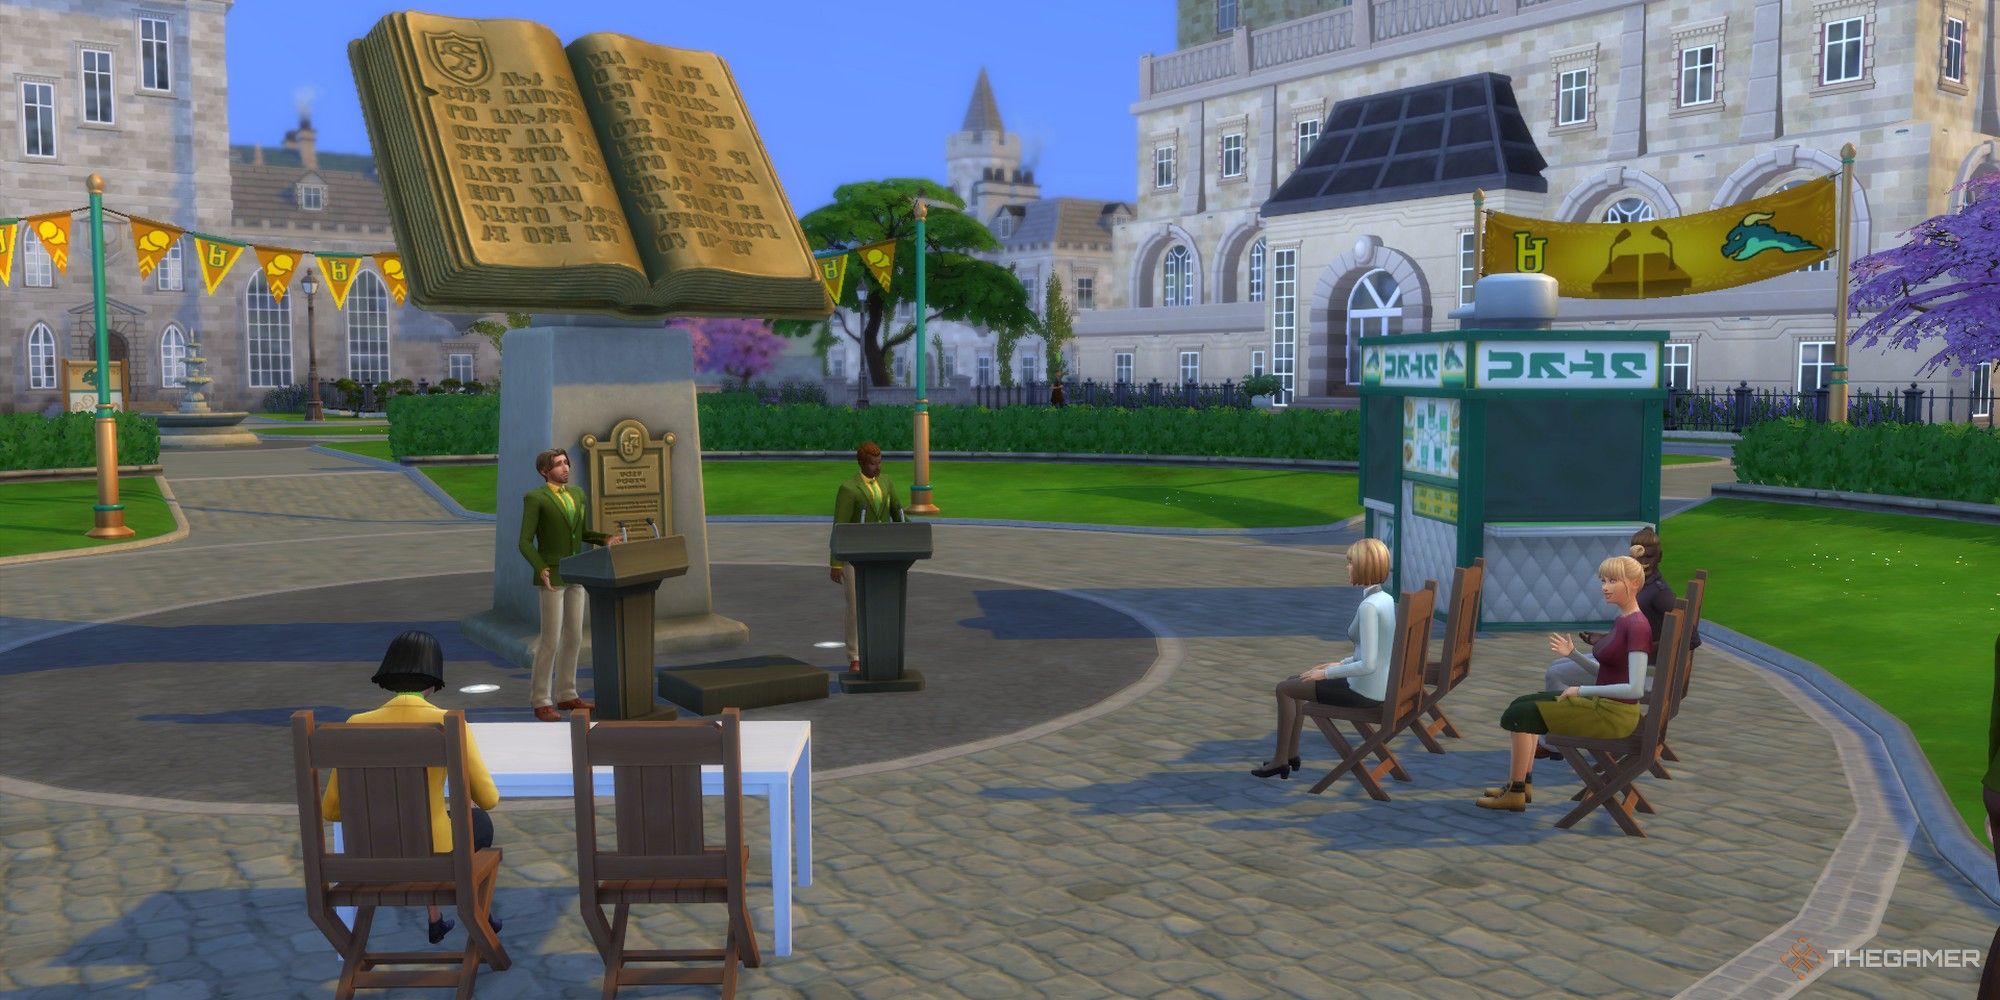 write research paper sims 4